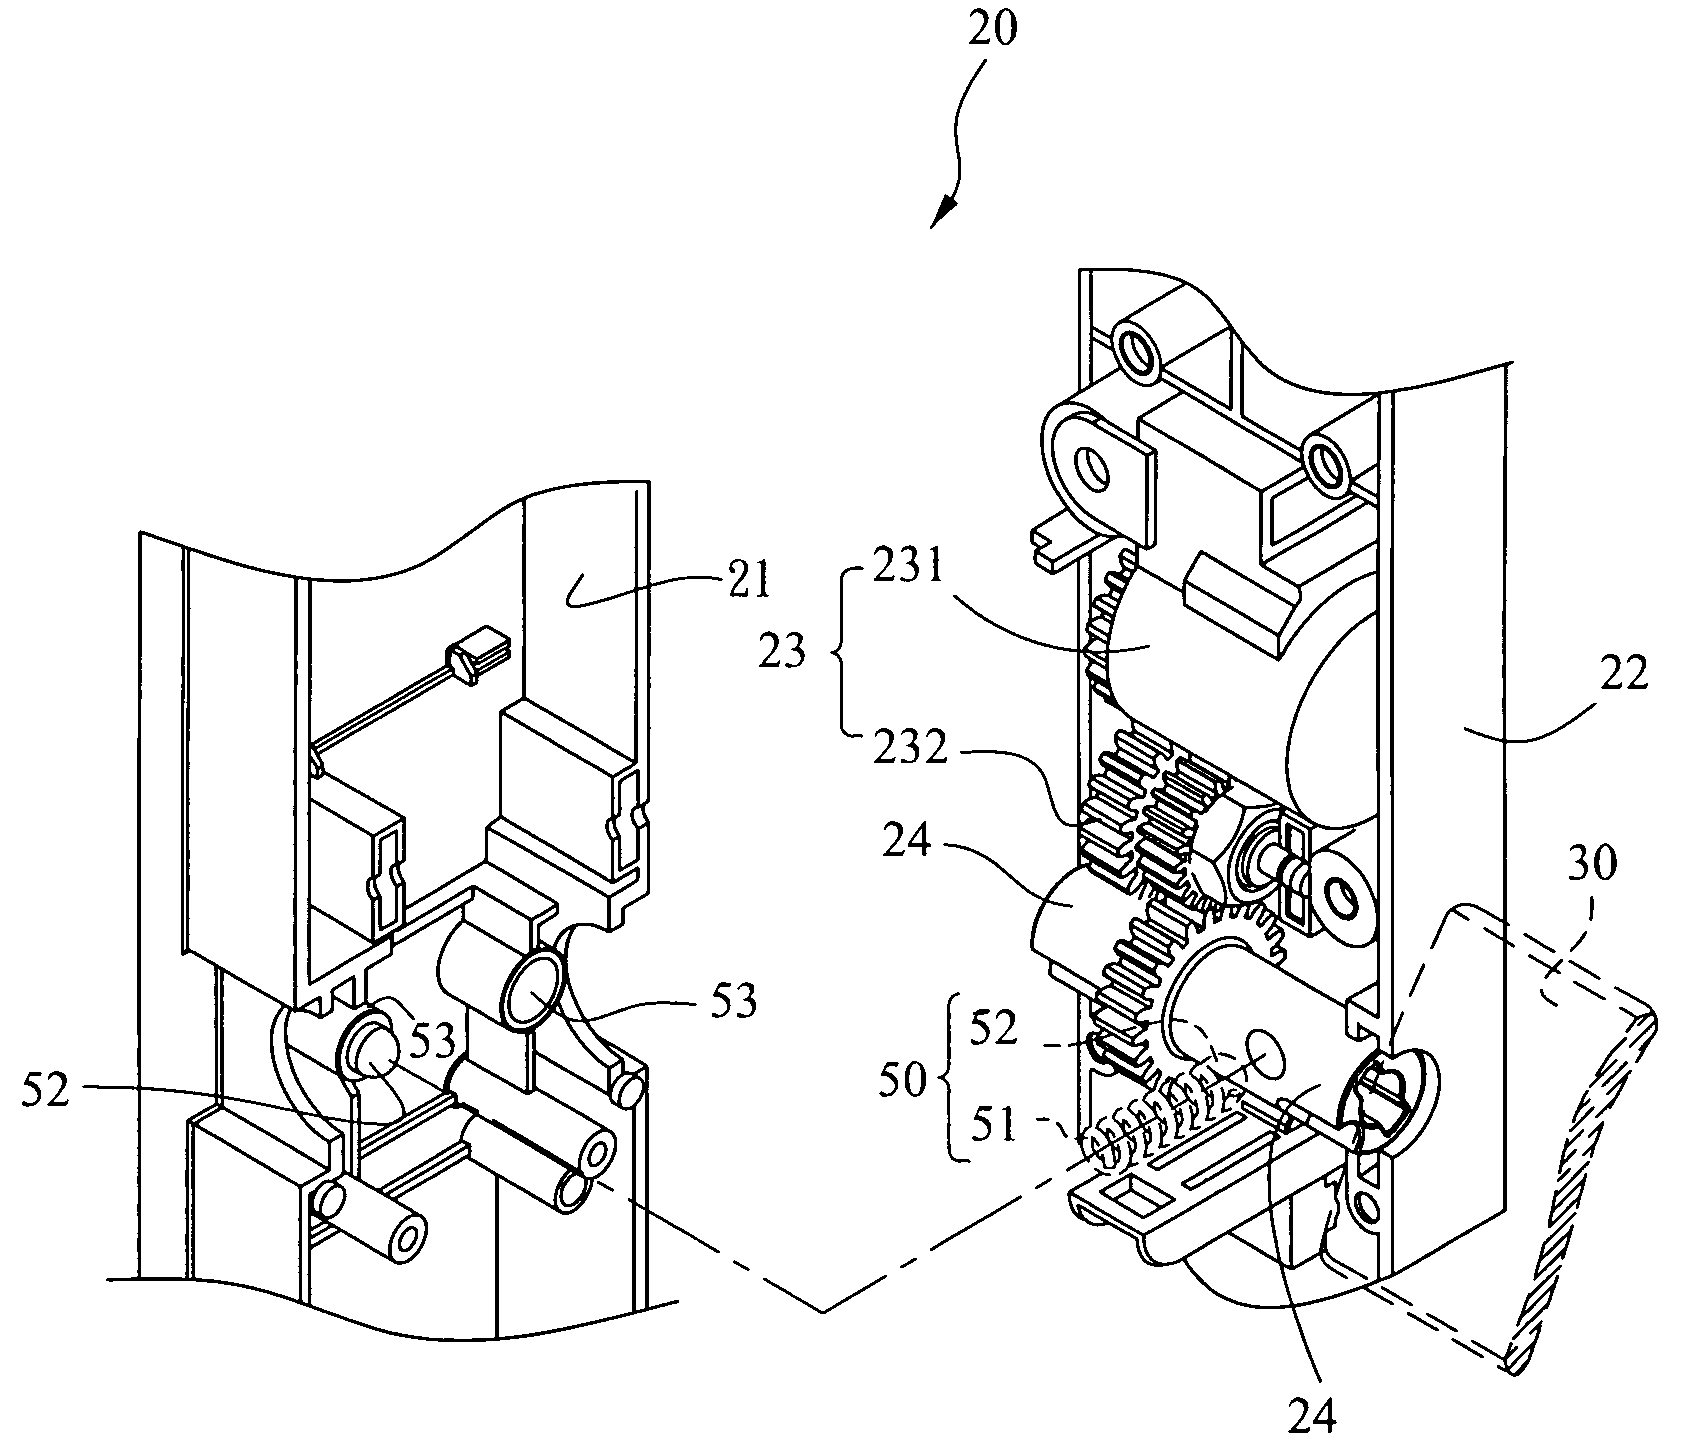 Louver blade positioning device of motorized shutter assembly